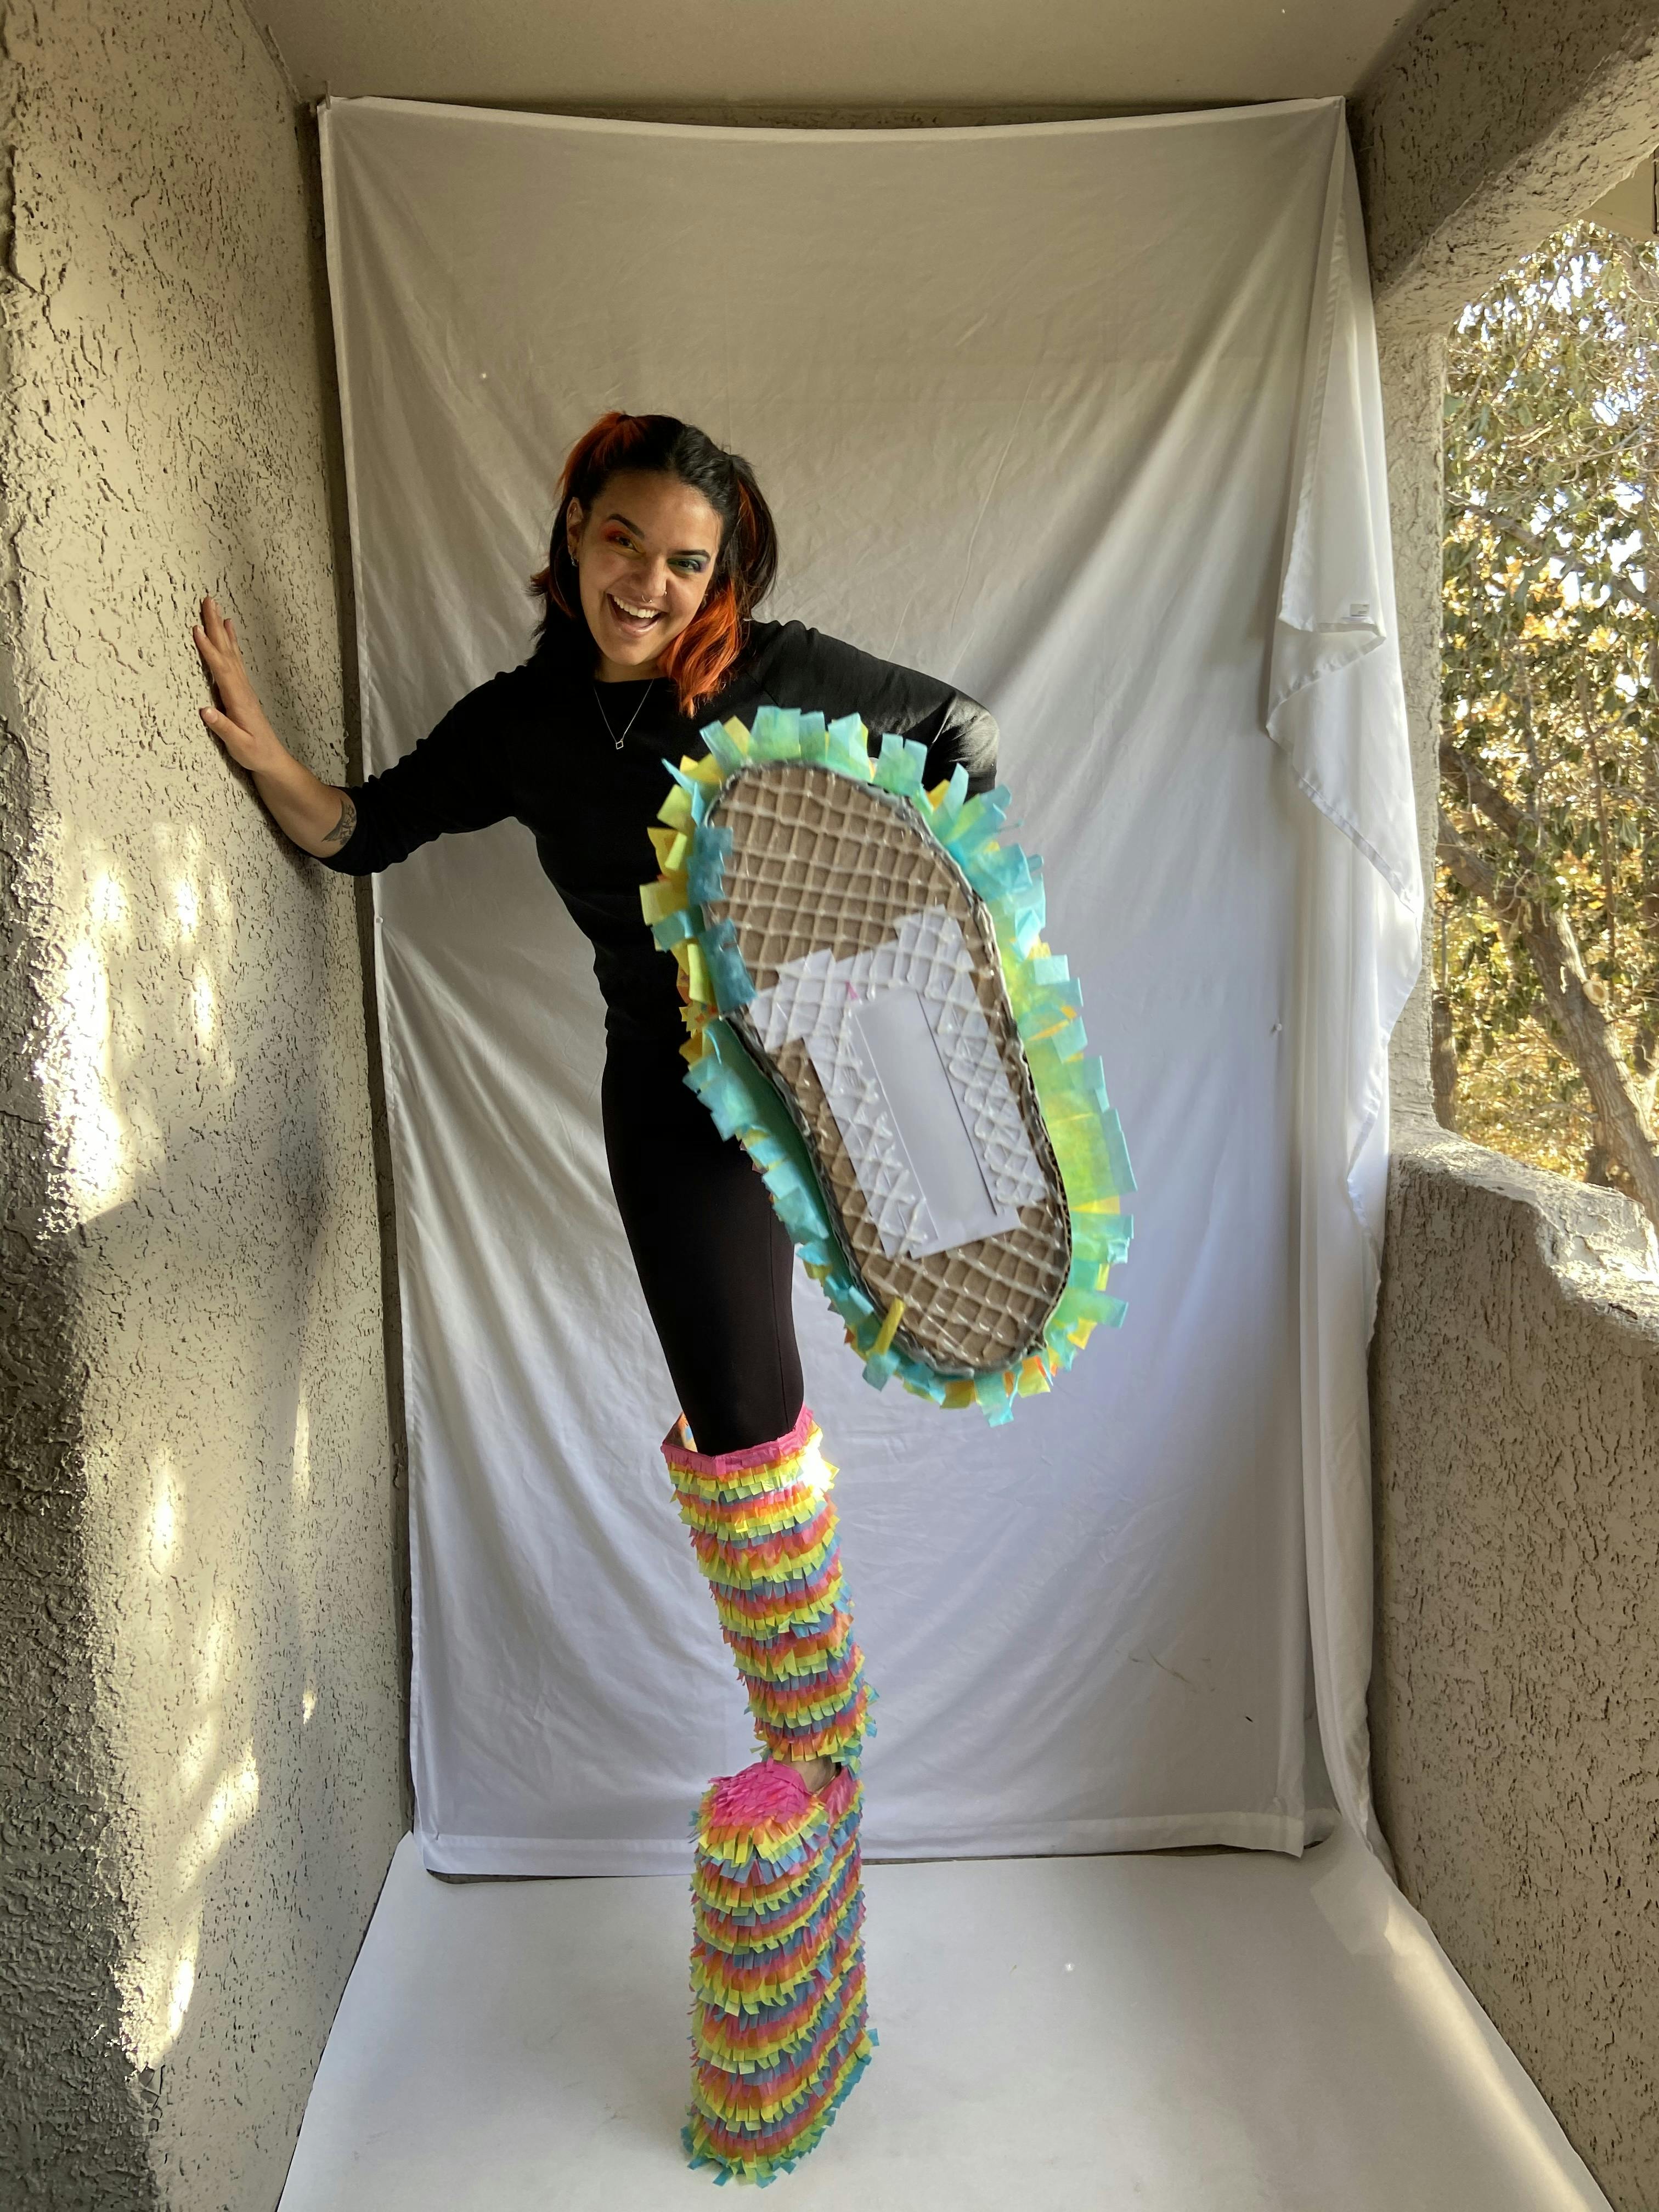 Artist wearing shoes made from piñata materials.